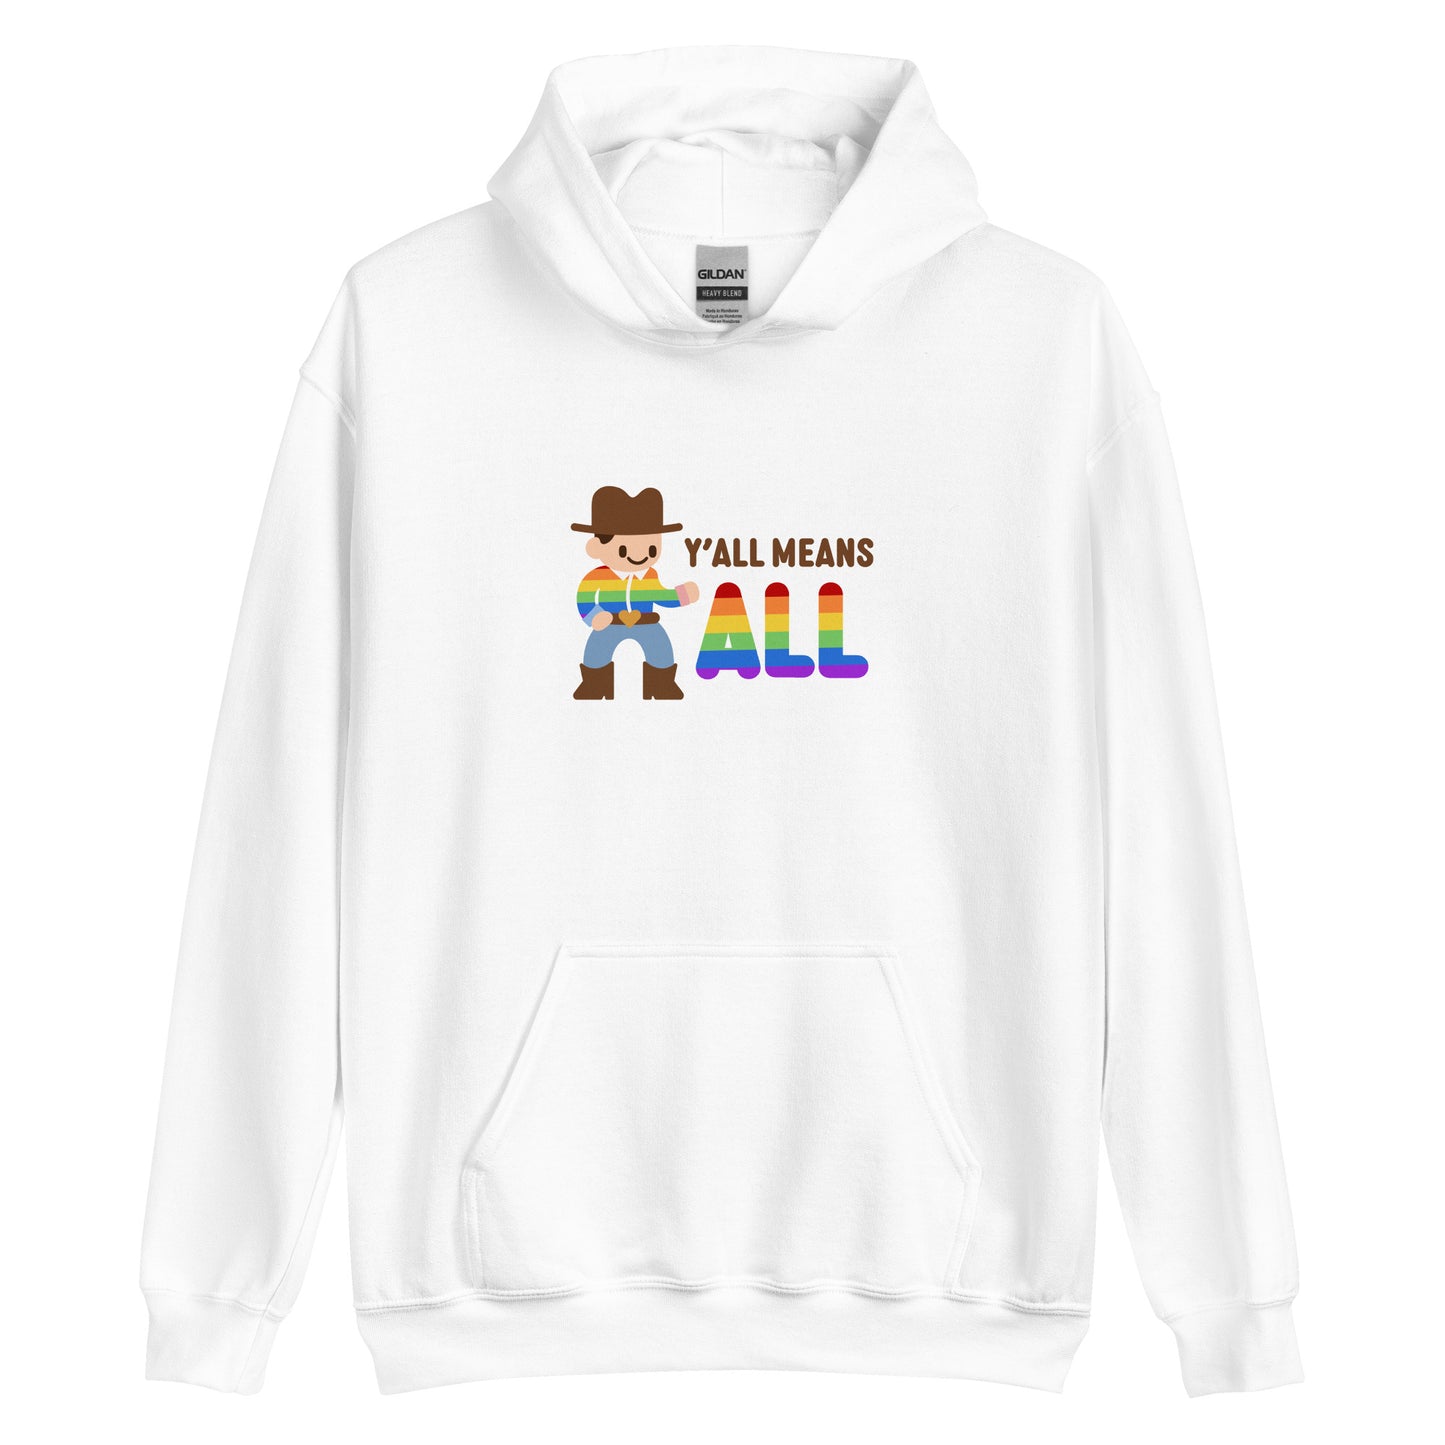 A white hooded sweatshirt featuring an illustration of a smiling cowboy wearing a rainbow striped shirt. Text alongside the cowboy reads "Y'all means ALL". The word "ALL" is rainbow-colored to match the cowboy's shirt.